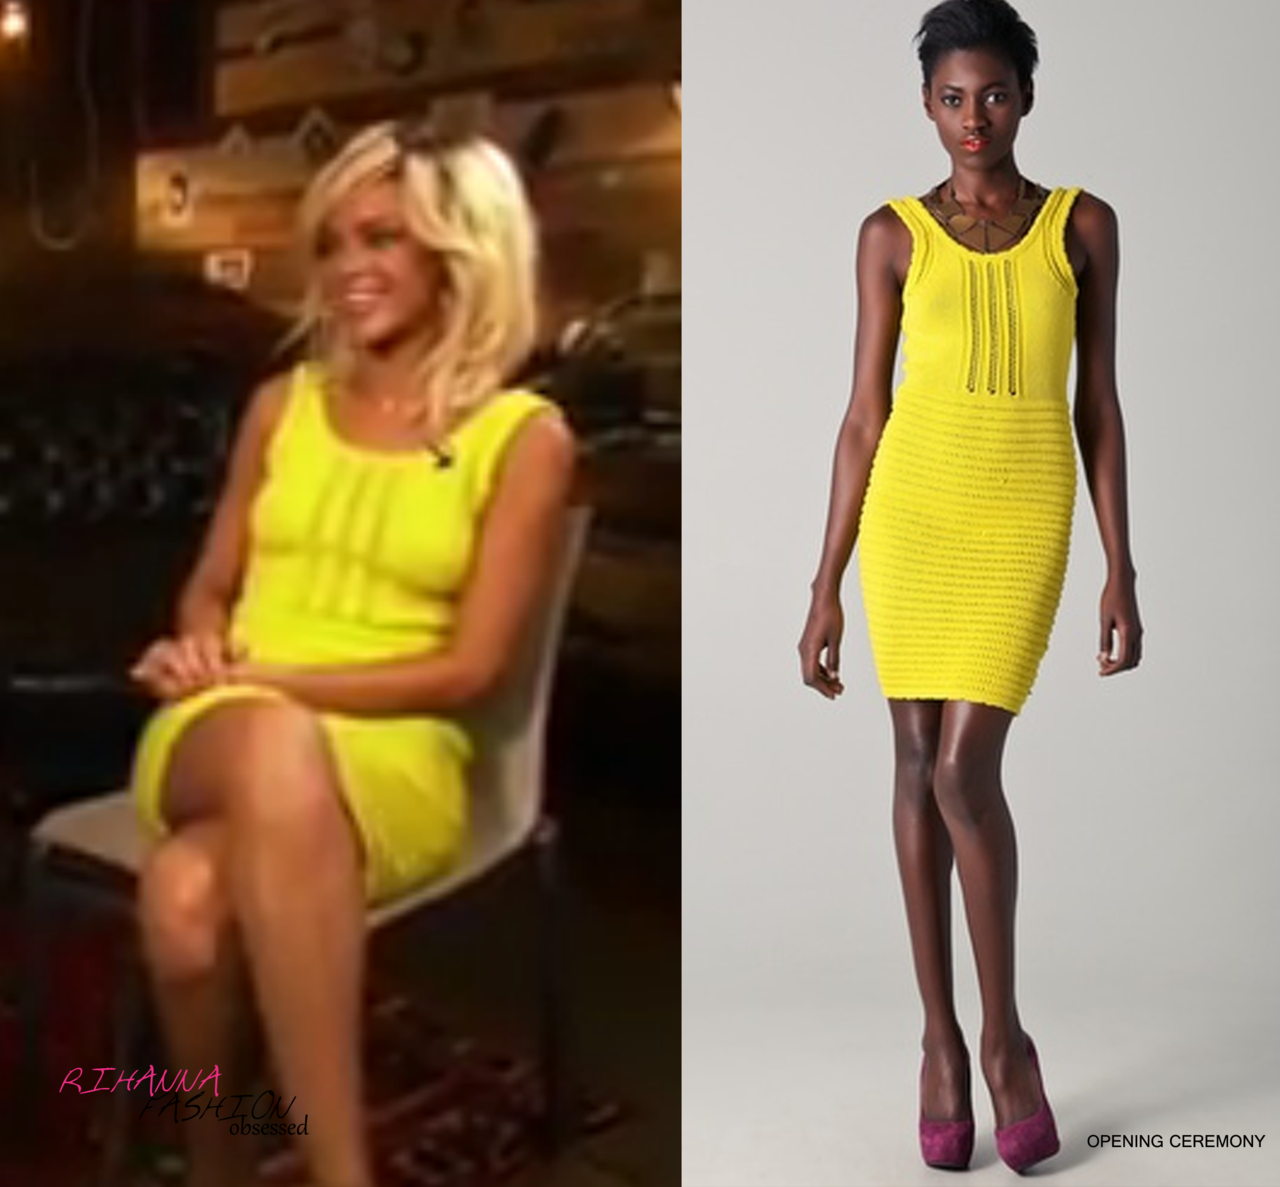 Rihanna apperared on Access Hollywood a few weeks back in a bright yellow Spongy Knit Mini Dress by Opening Ceremony.

